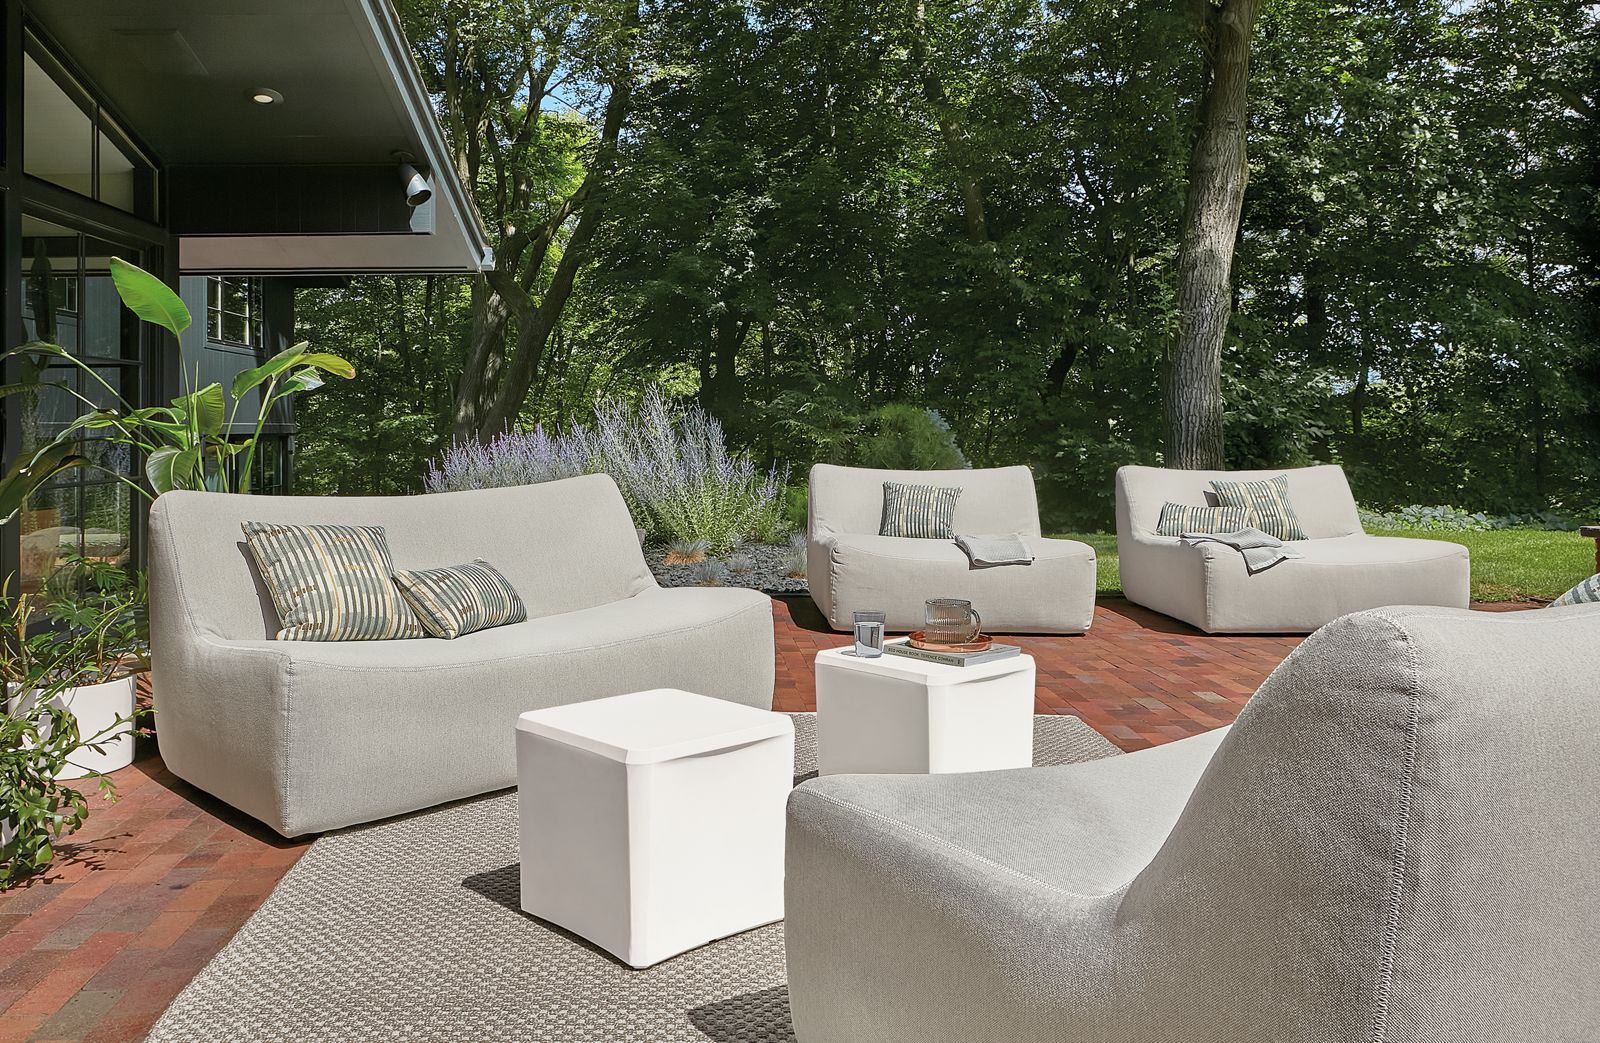 Outdoor space with several large maya sofas and chaises in grey and two cusp stools.